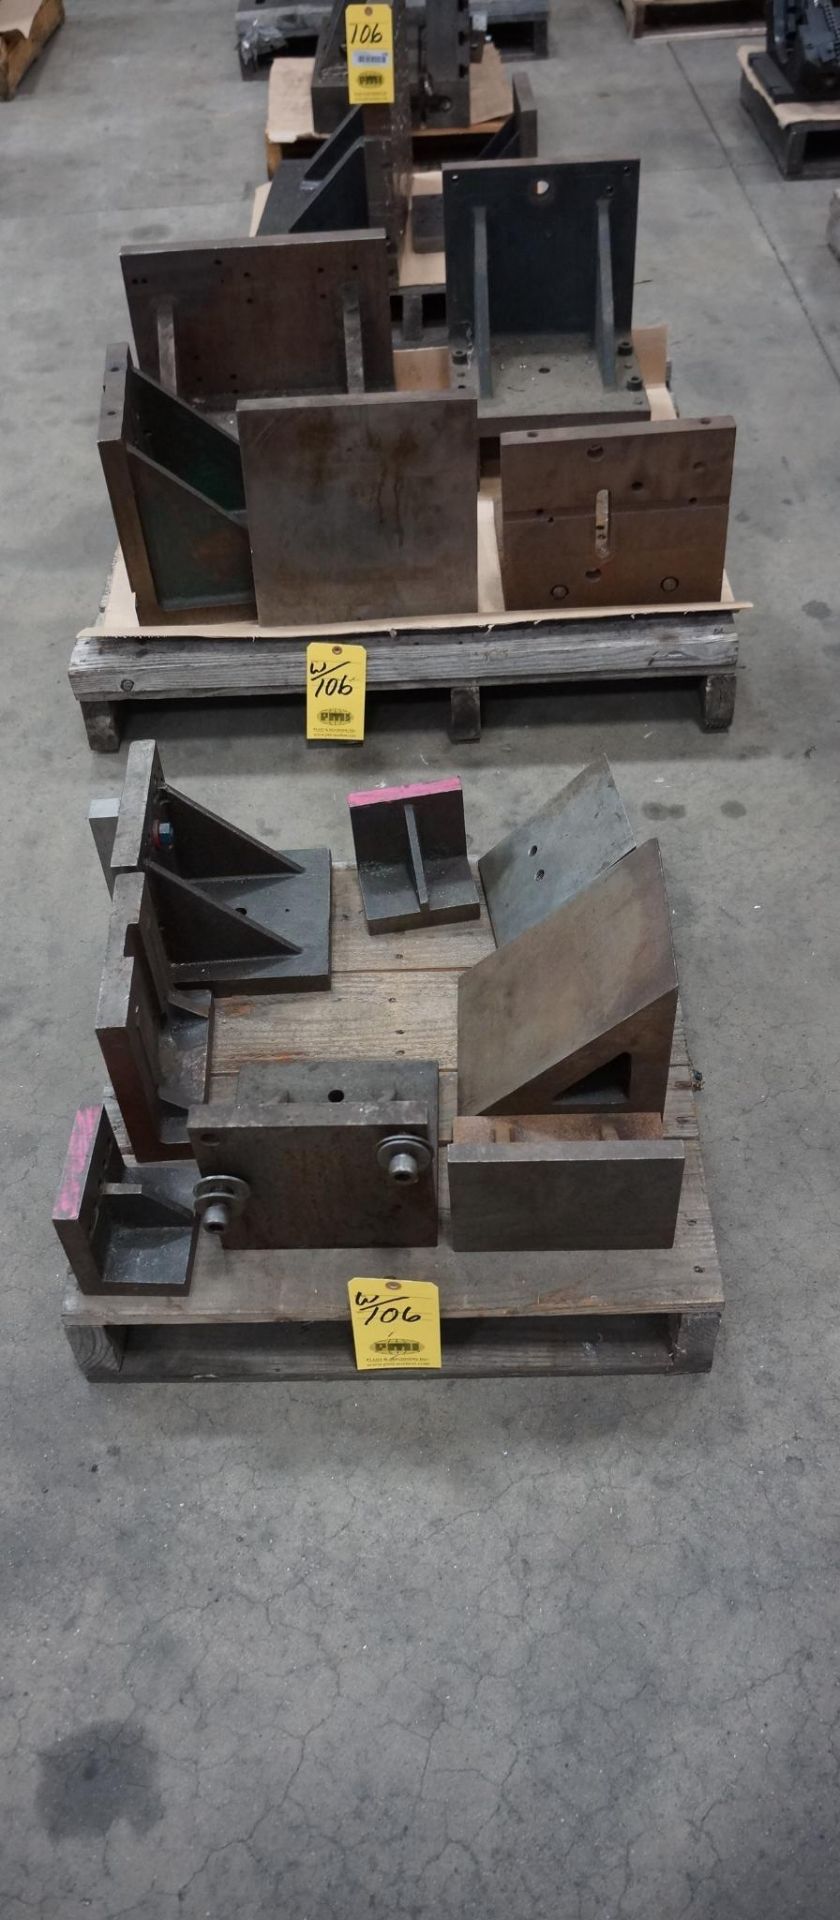 LOT OF ANGLE PLATES (THREE PALLETS) approx. (15) ranging in size from 12" x 24"W. x 17" tall to 5" x